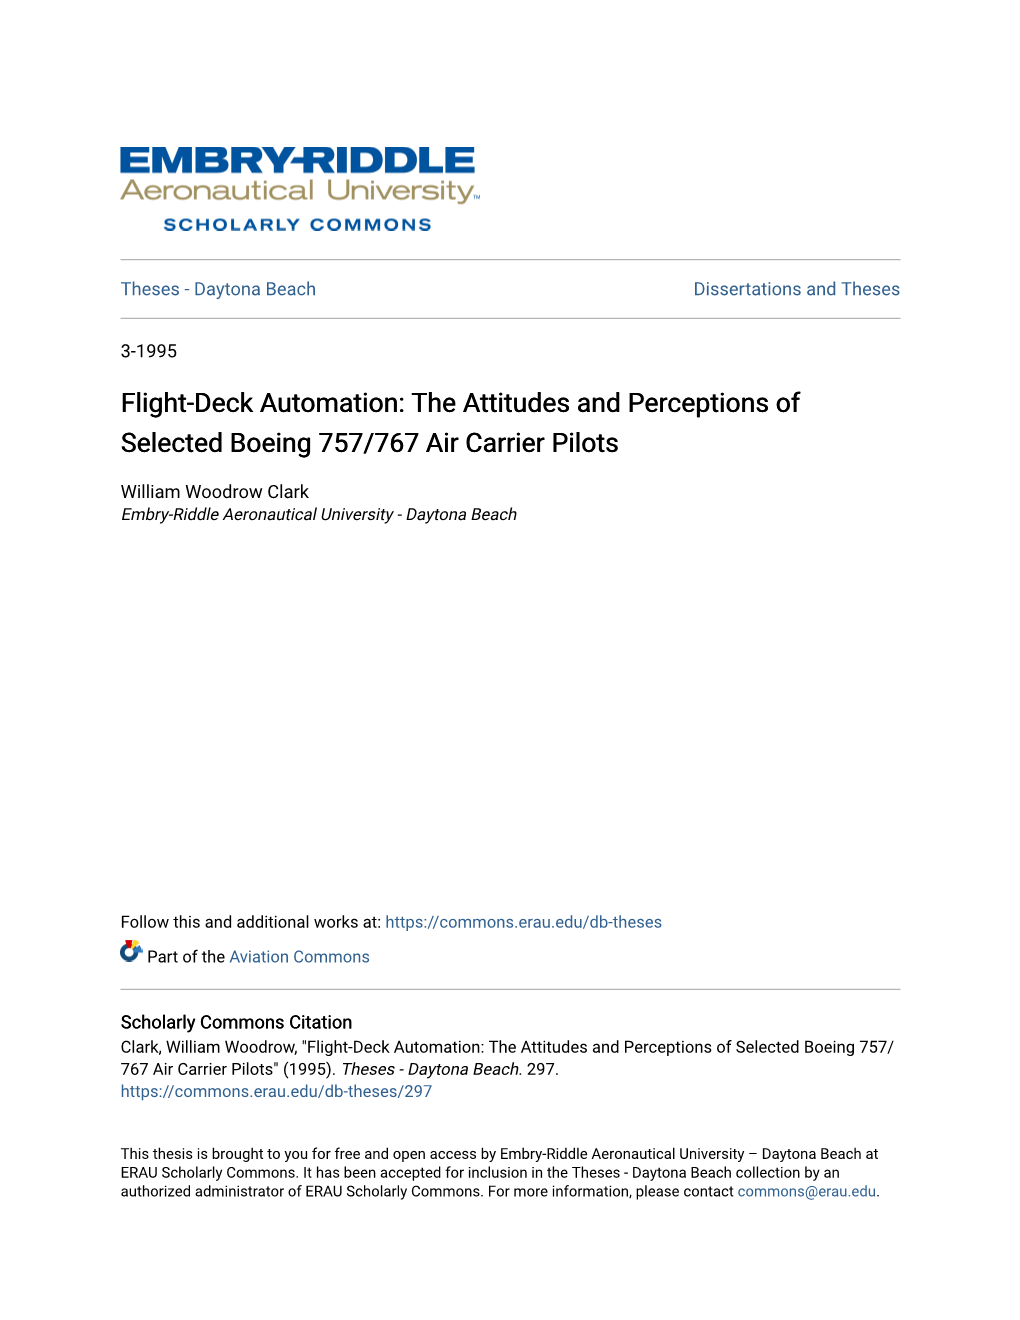 Flight-Deck Automation: the Attitudes and Perceptions of Selected Boeing 757/767 Air Carrier Pilots